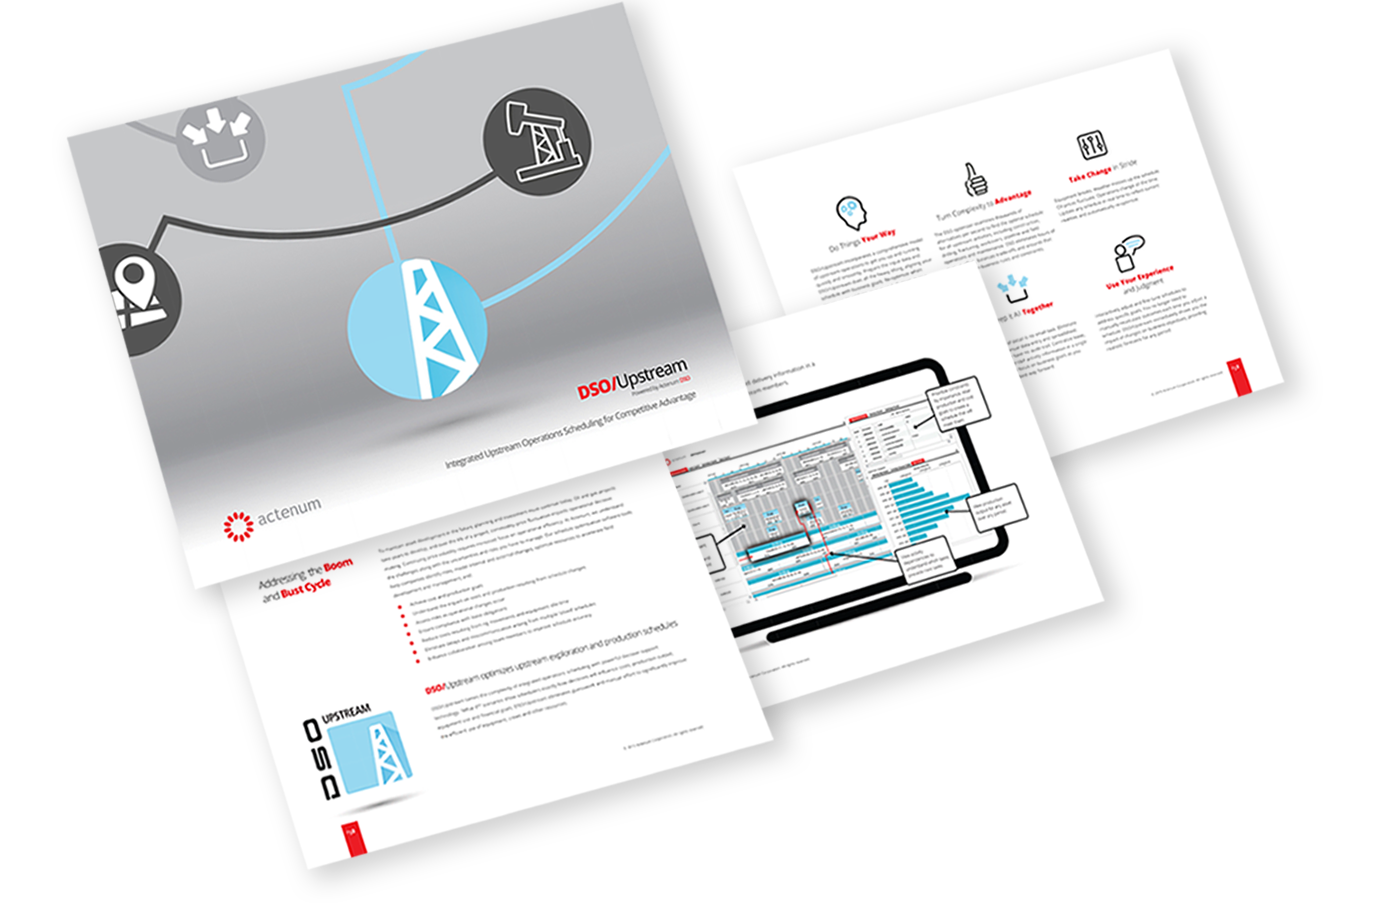 Four Actenum brochures for their product line for the natural resource industries